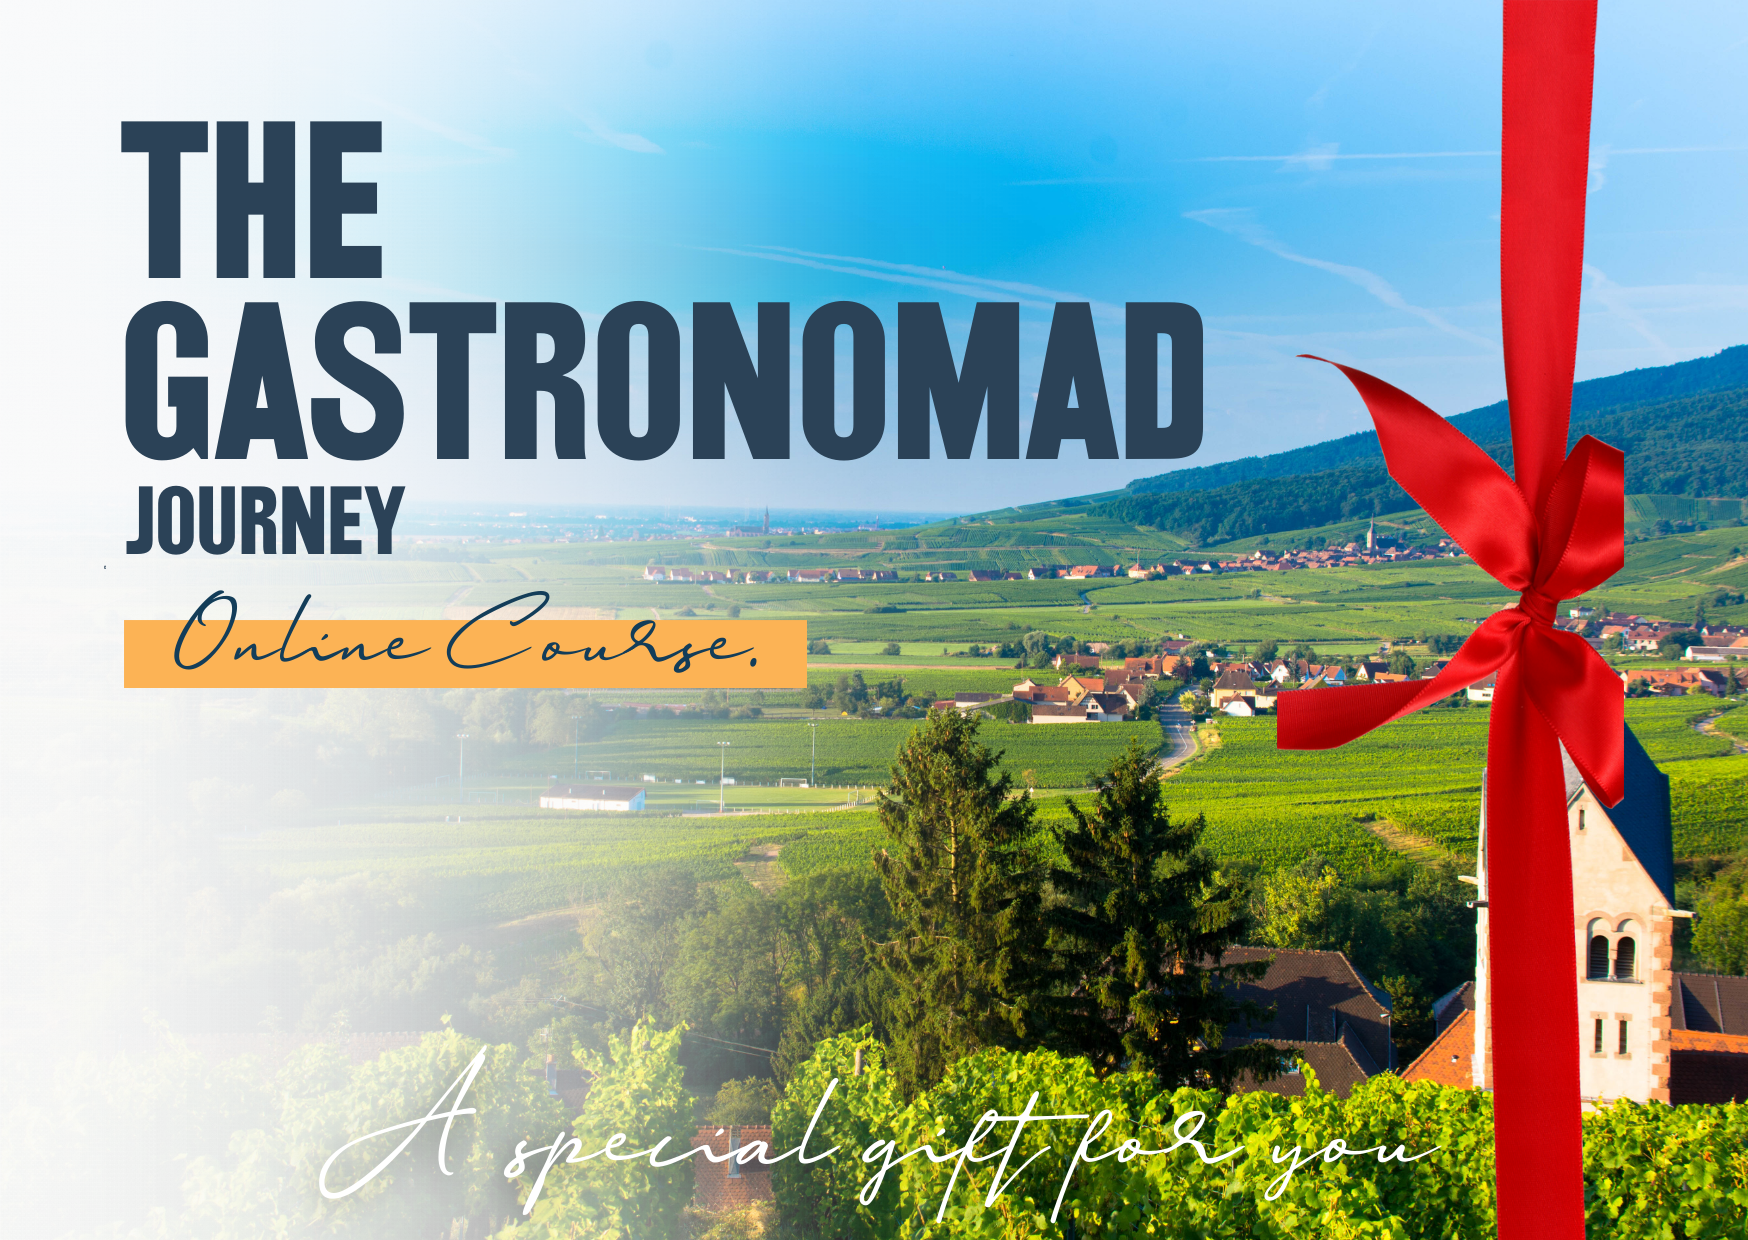 gastronomad journey gift card